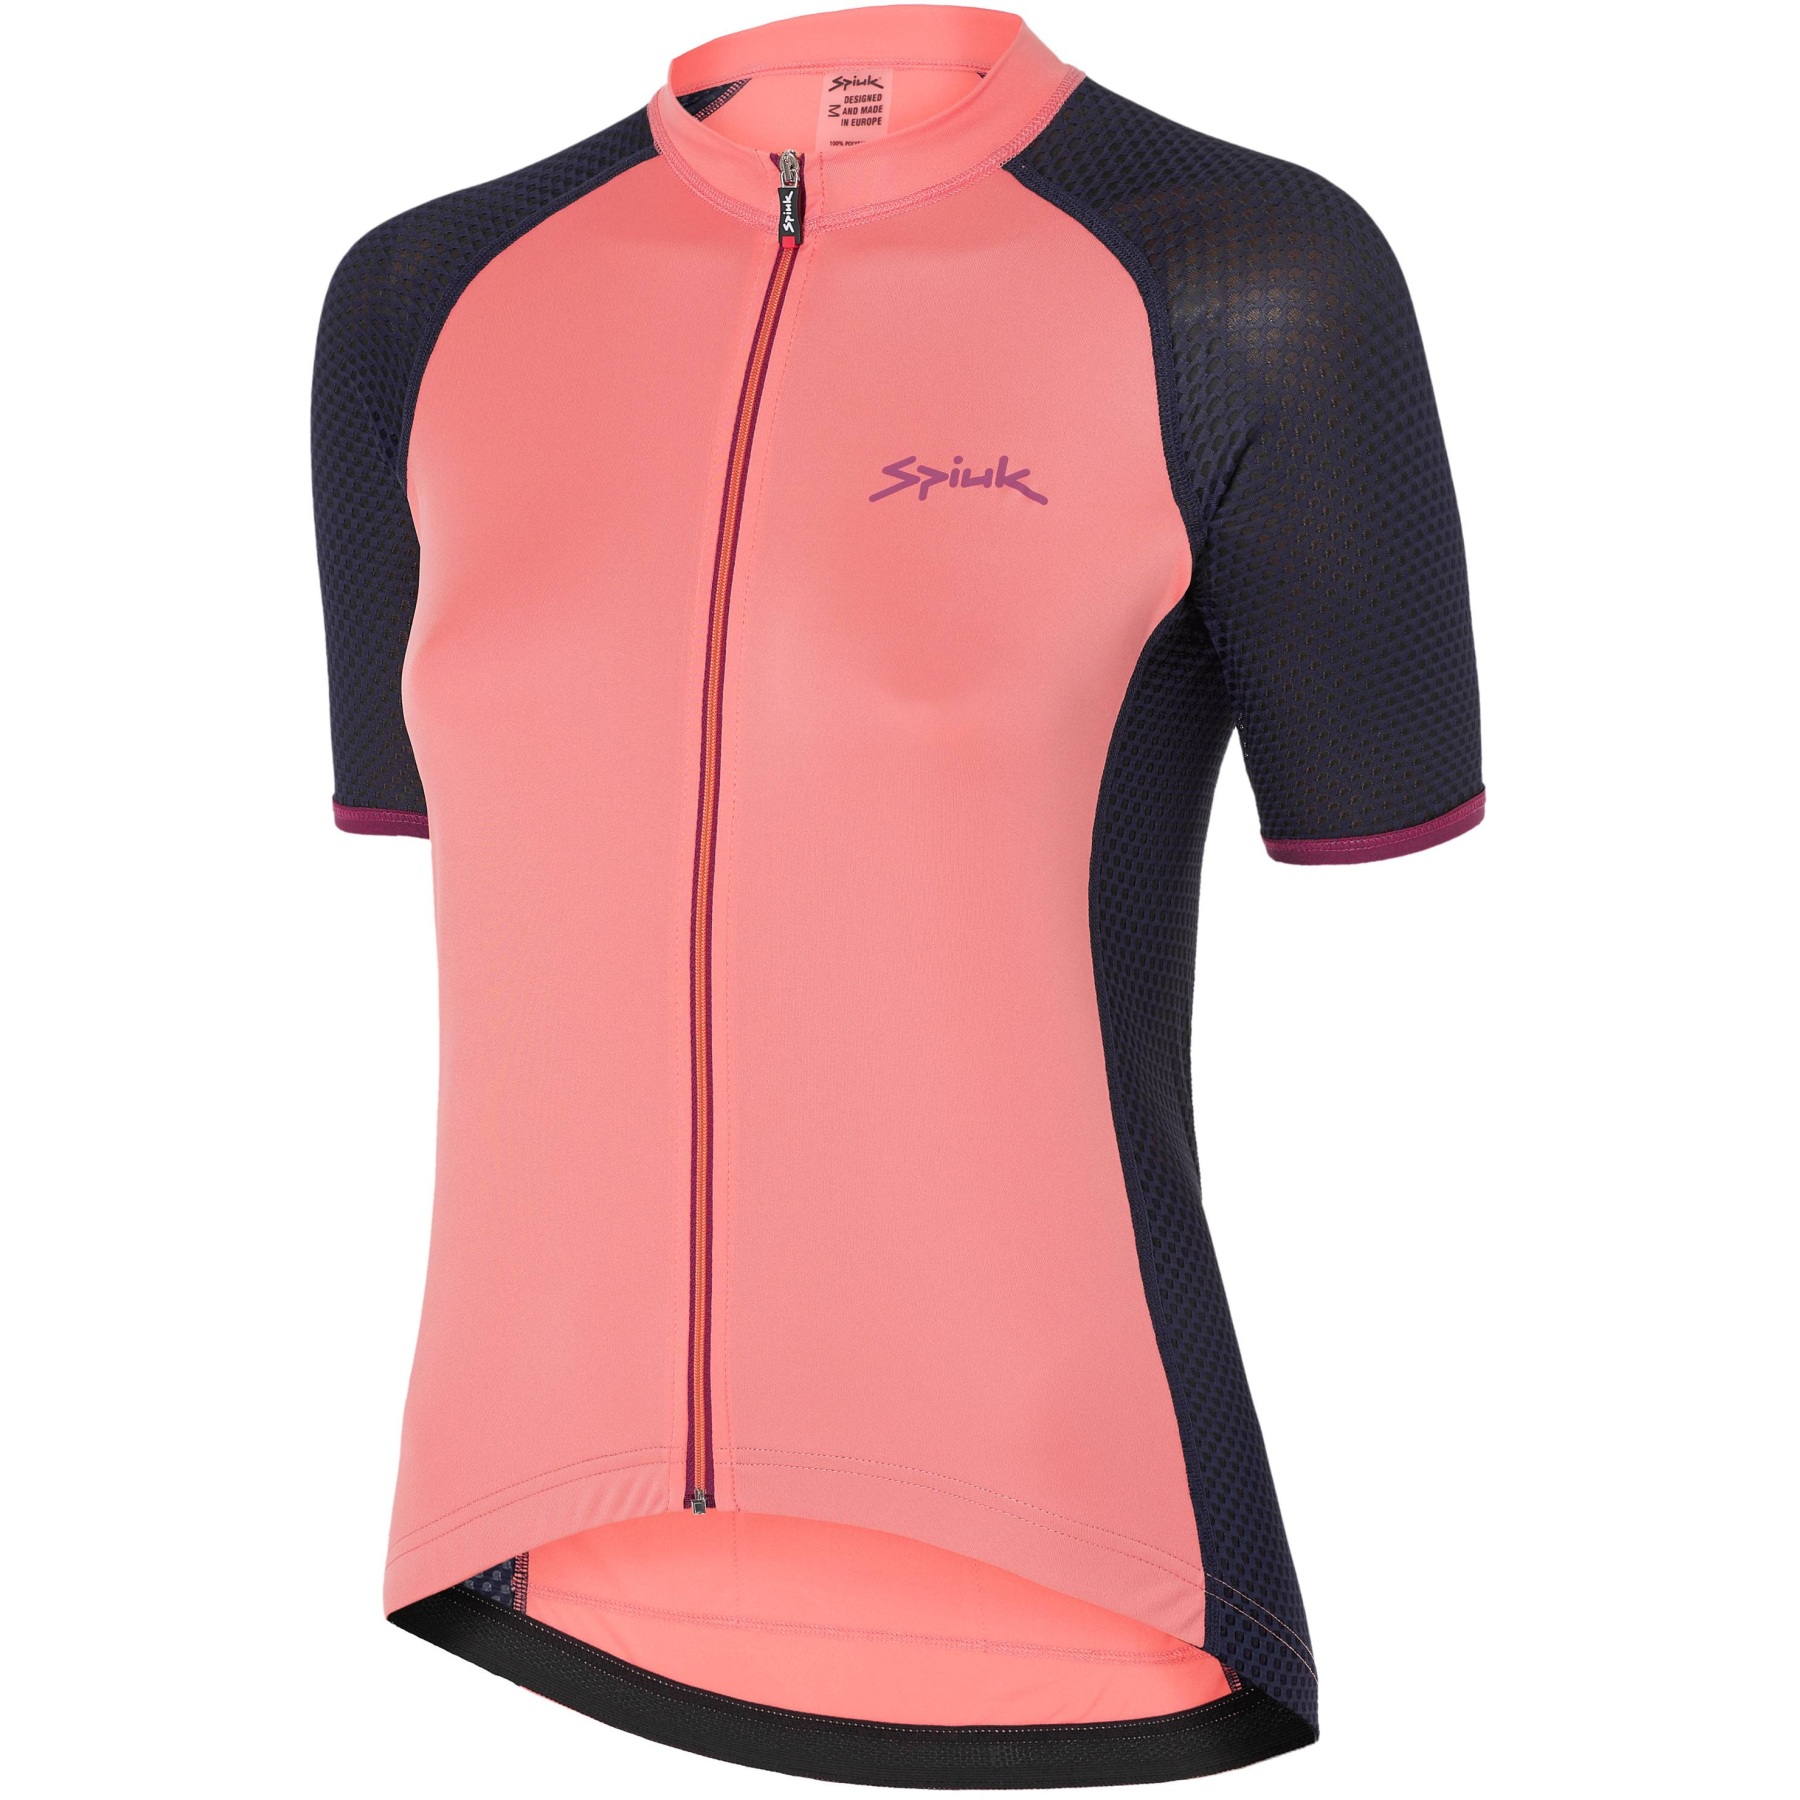 Image of Spiuk Race Jersey Women's - coral